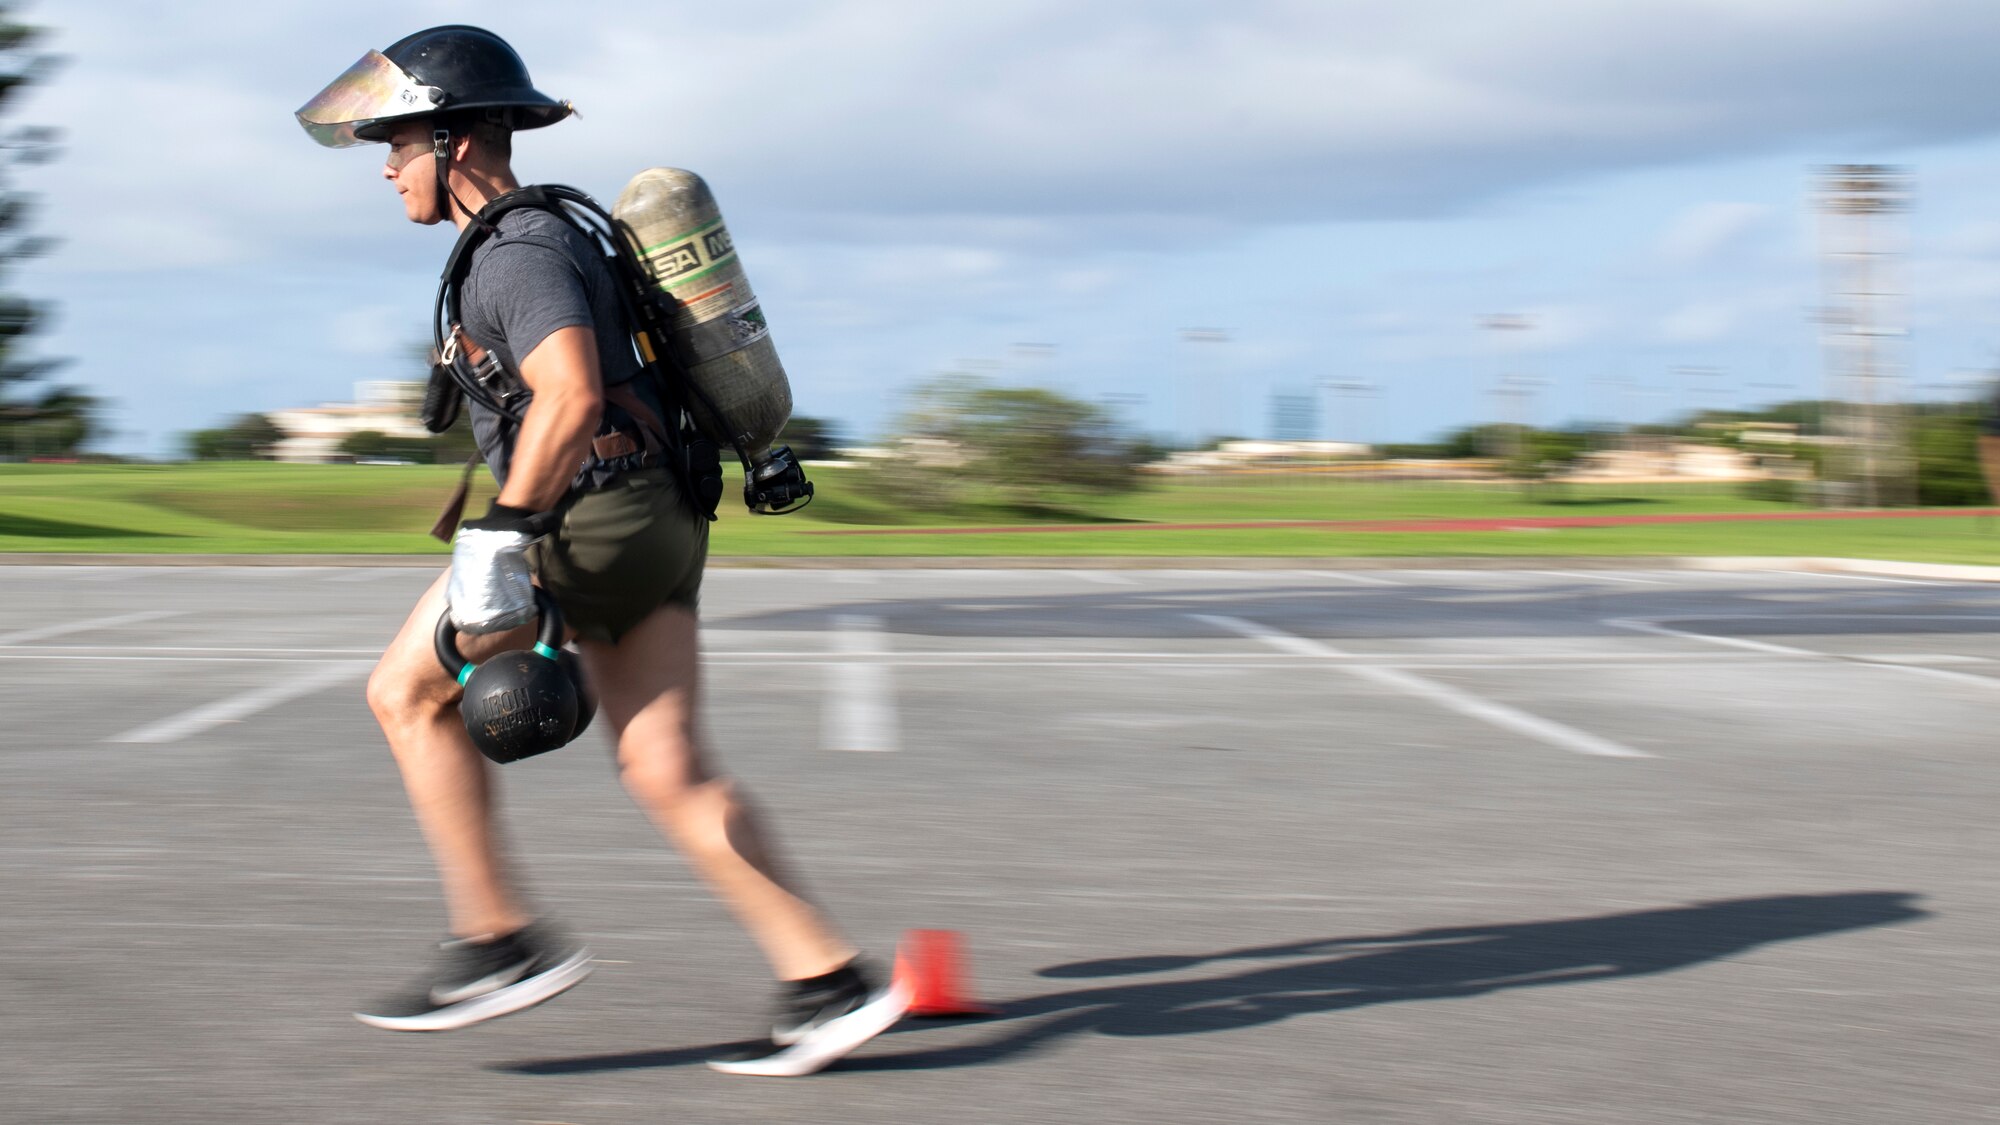 Tech. Sgt. Justin Campos, 18th Civil Engineer Squadron explosive ordnance disposal technician, participates in the fire muster challenge kettlebell run during National Fire Prevention Week at Kadena Air Base, Japan, Oct. 6, 2022. The competition gave bystanders and participants an opportunity to see and experience the various types of physical exertion firefighters must prepare for when responding to emergencies. (U.S. Air Force photo by Senior Airman Jessi Roth)